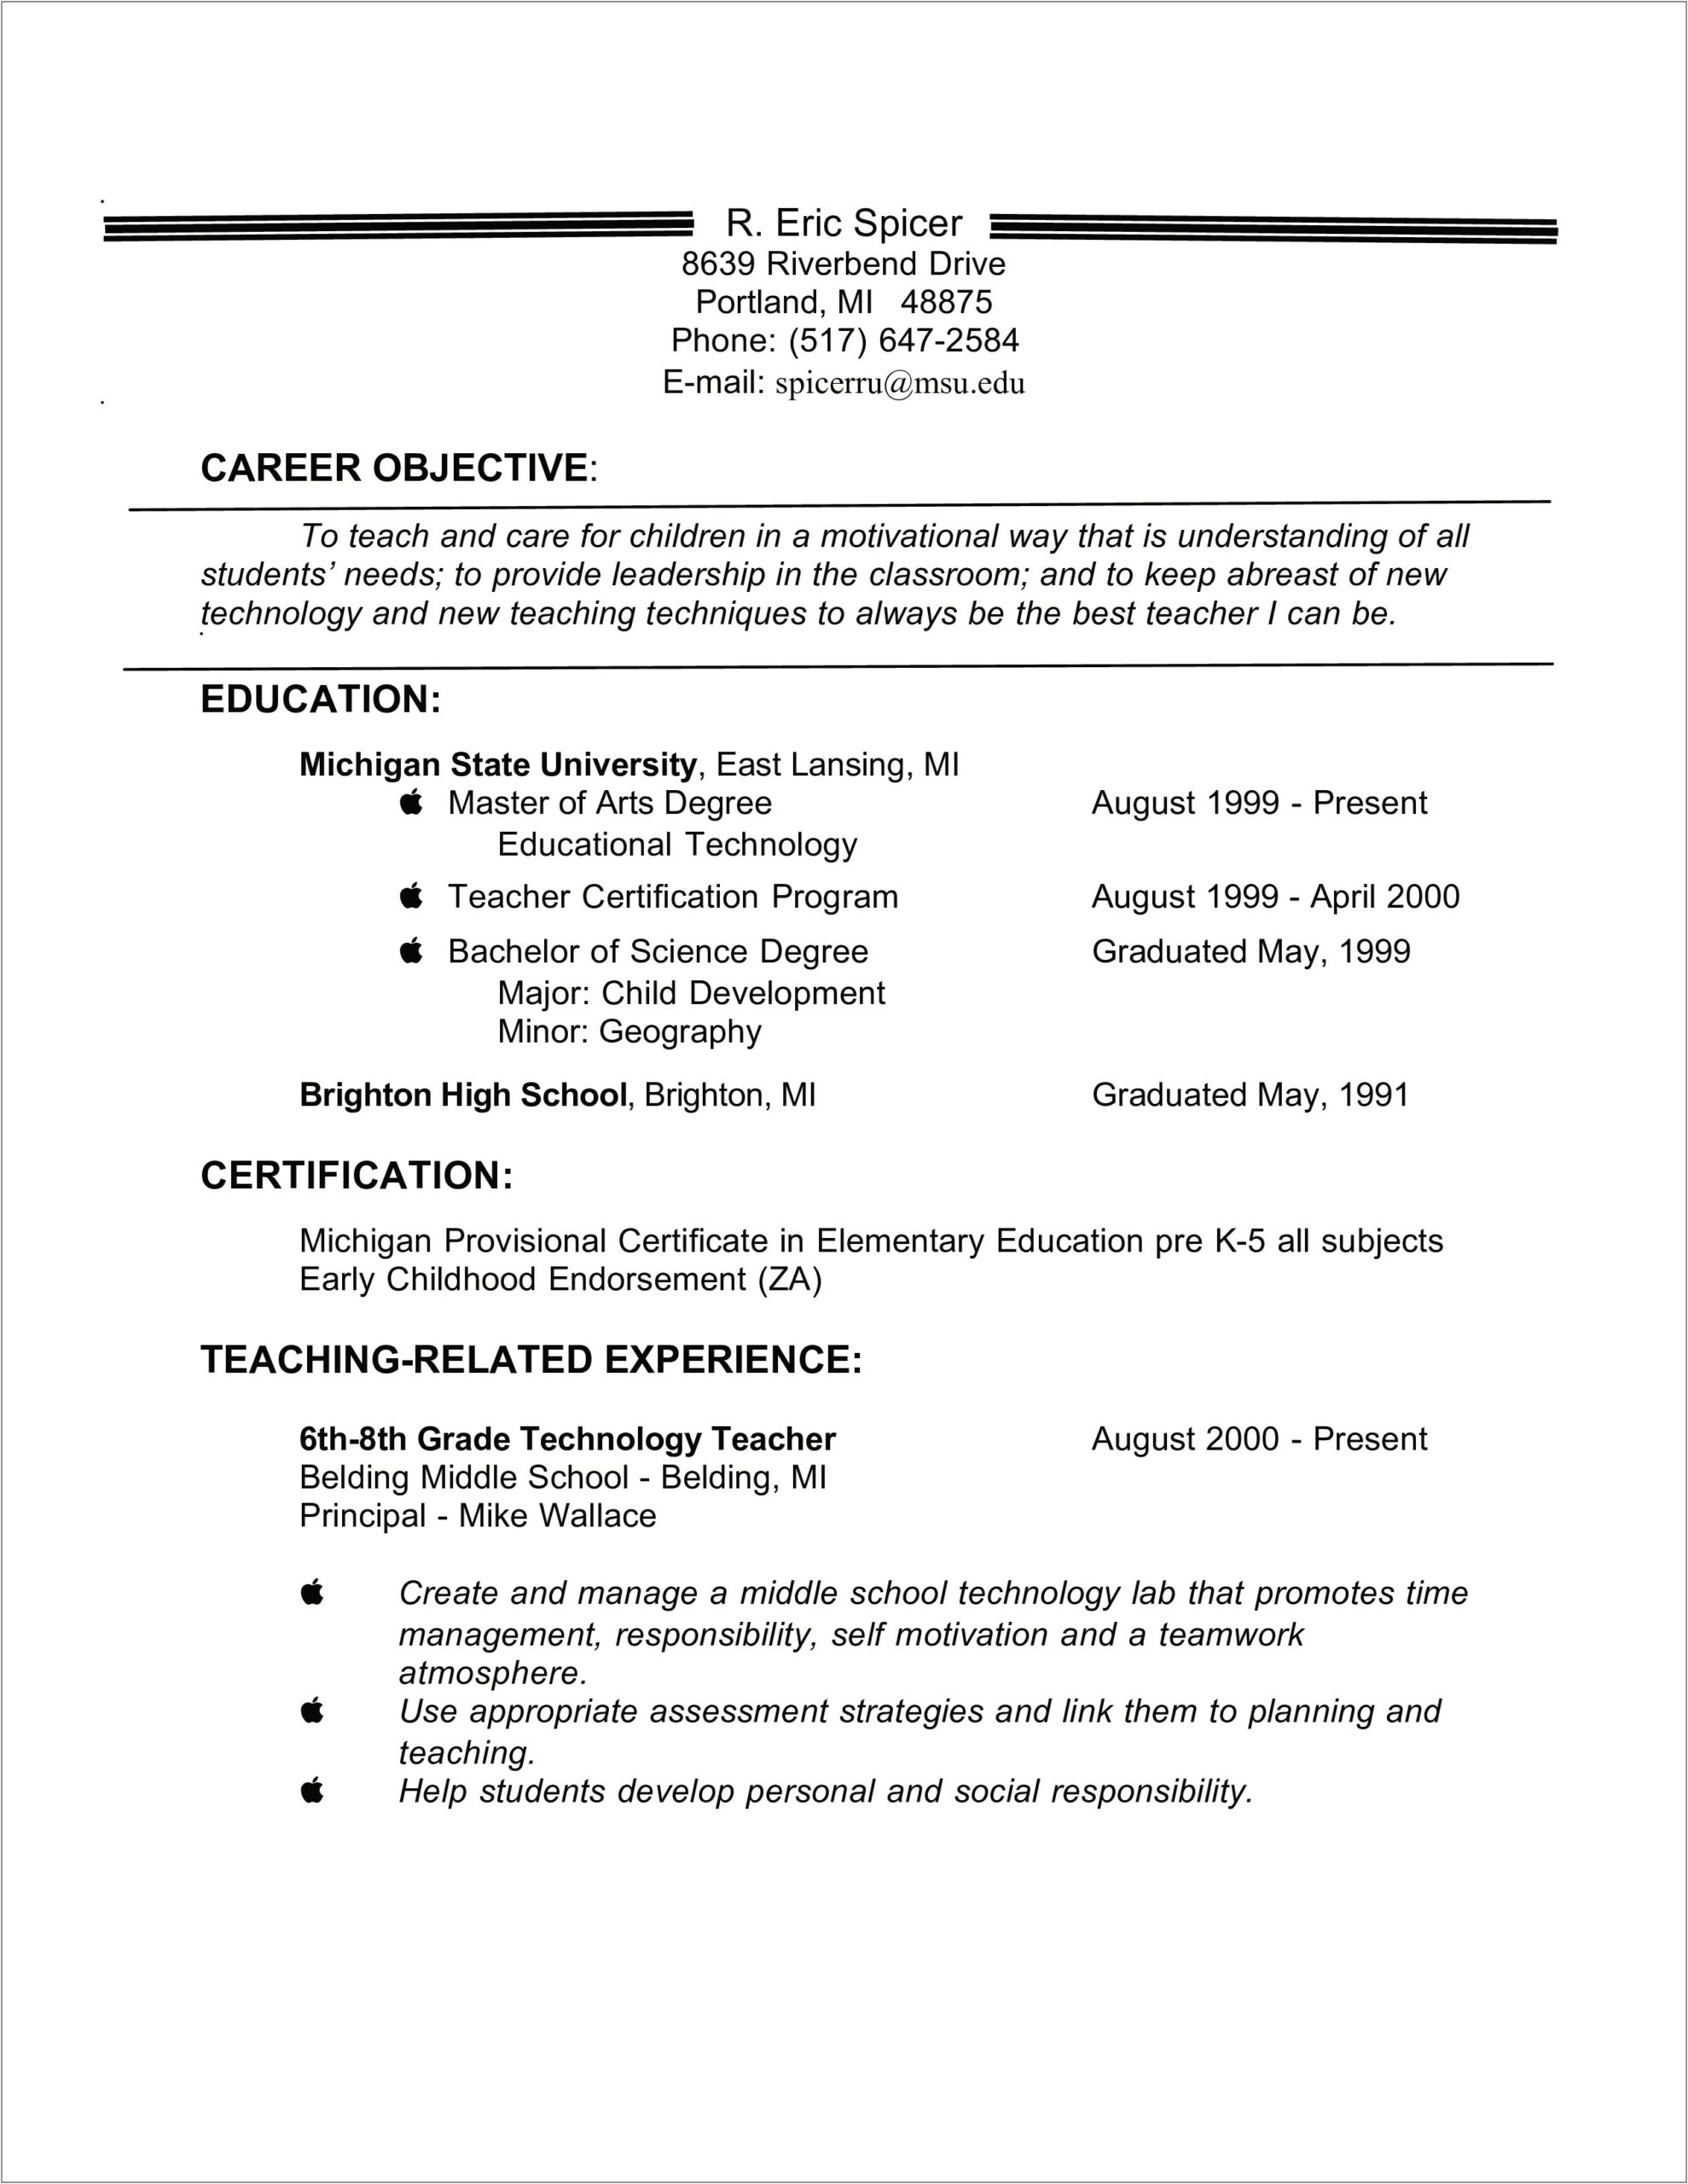 A Self Motivated College Student Summary Resume